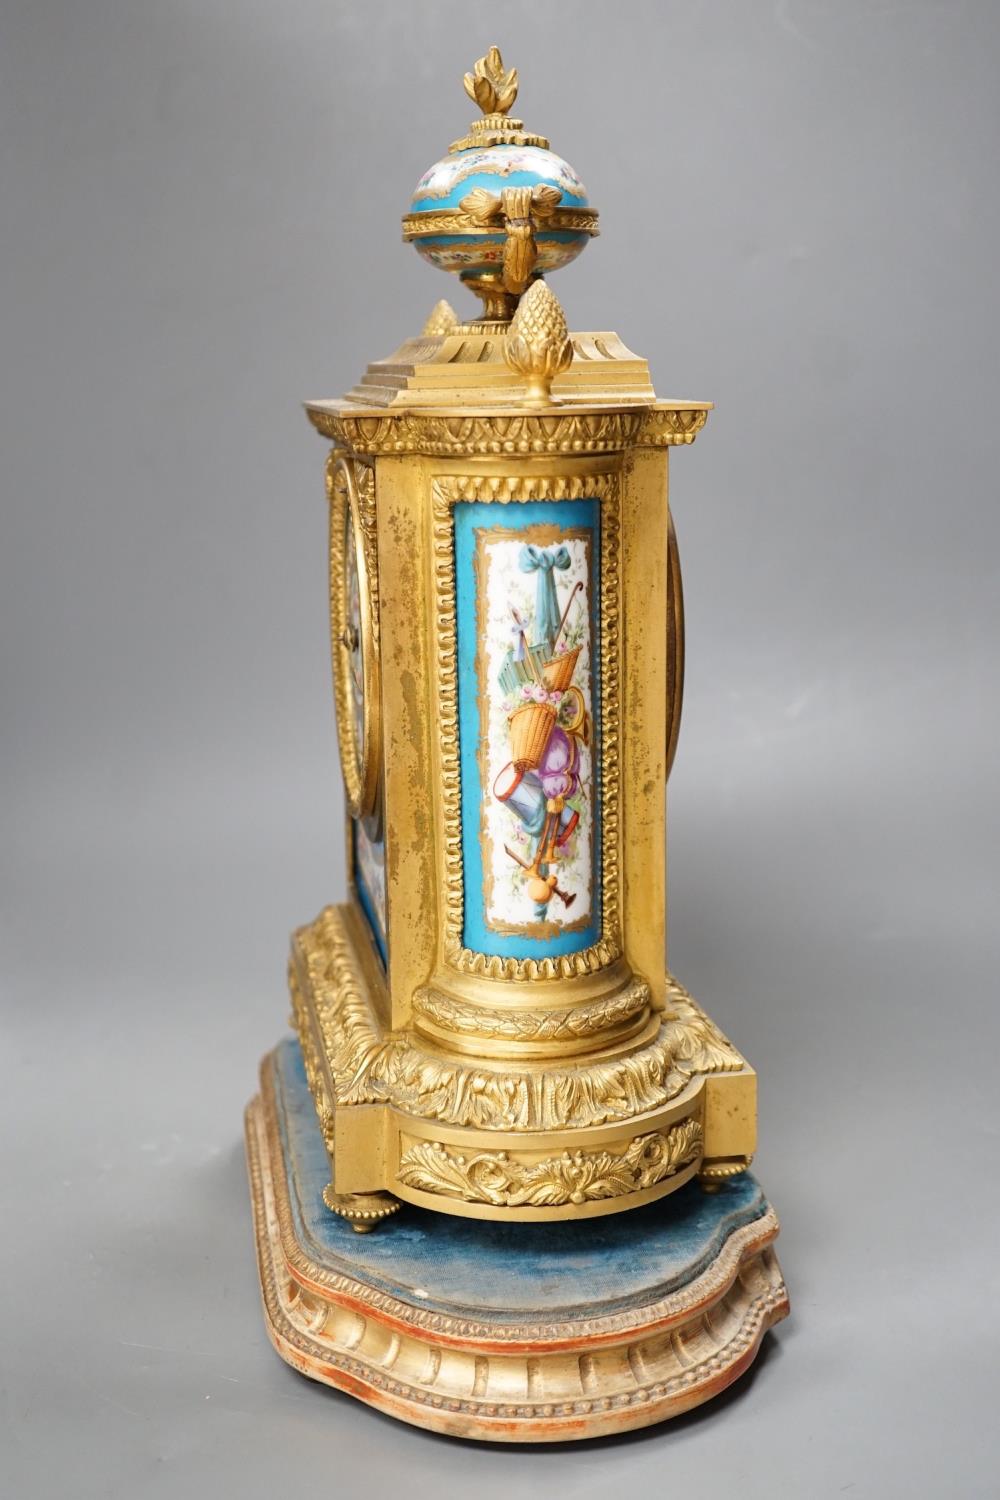 A French ormolu mantel clock, with inset floral decorated porcelain plaques and dial, 40cms high - Image 4 of 7